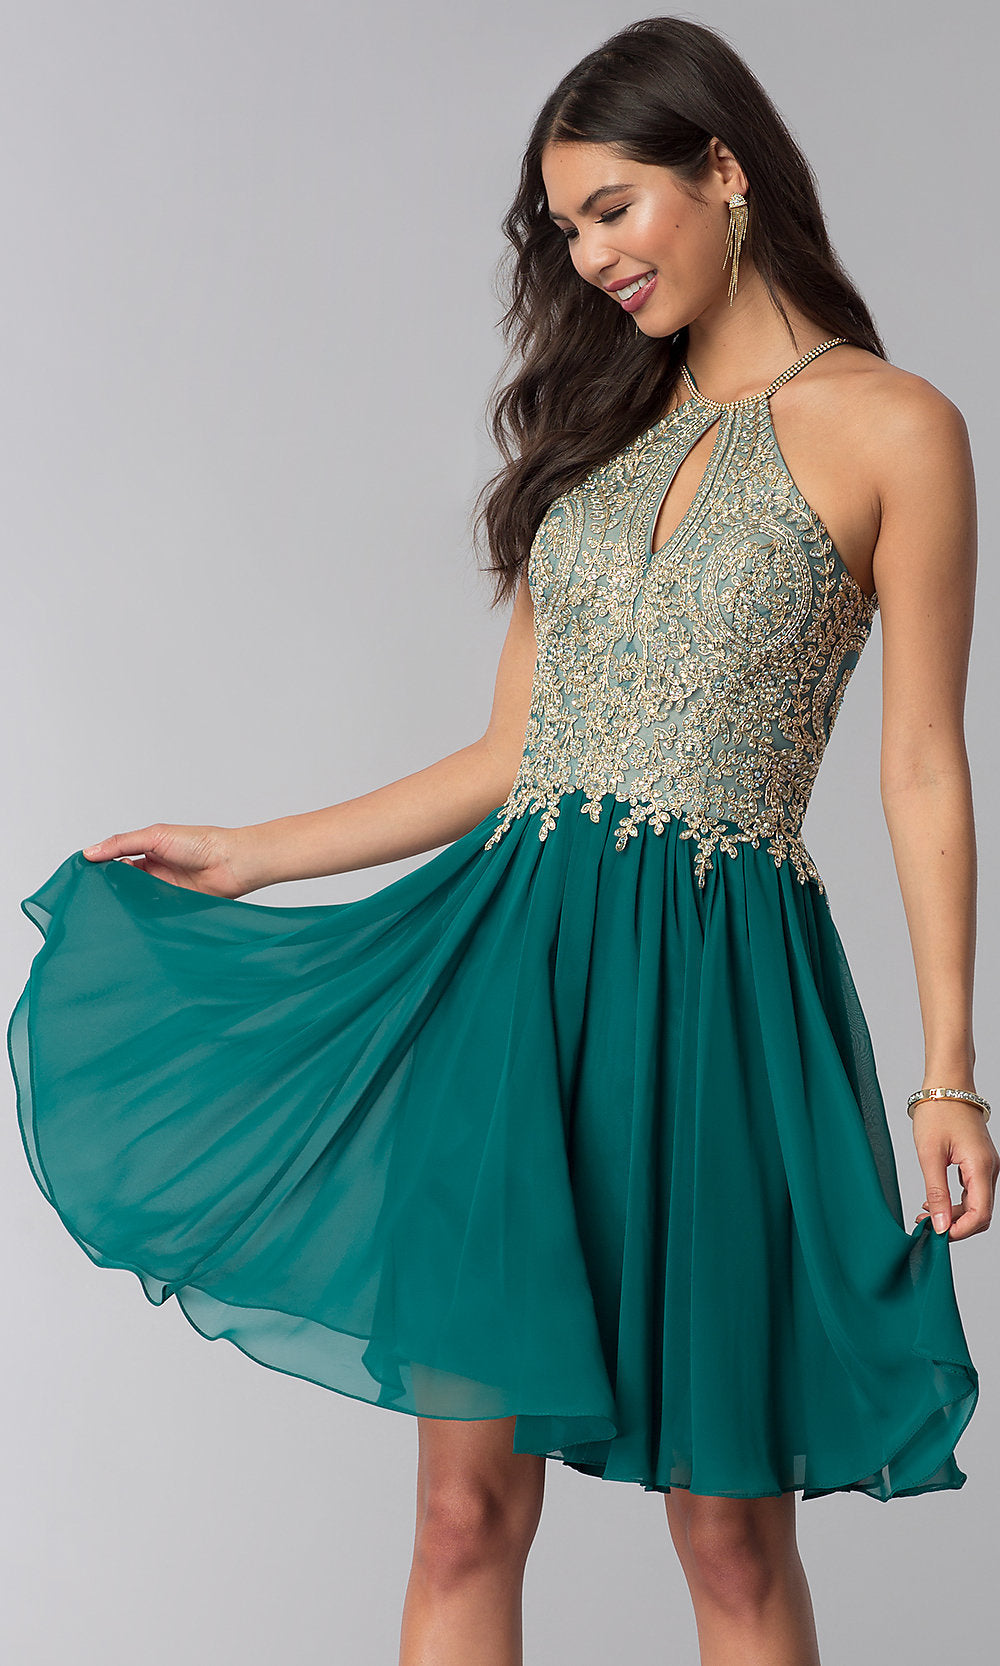 Jade/Gold Short Homecoming Dress with Beaded High-Neck Bodice